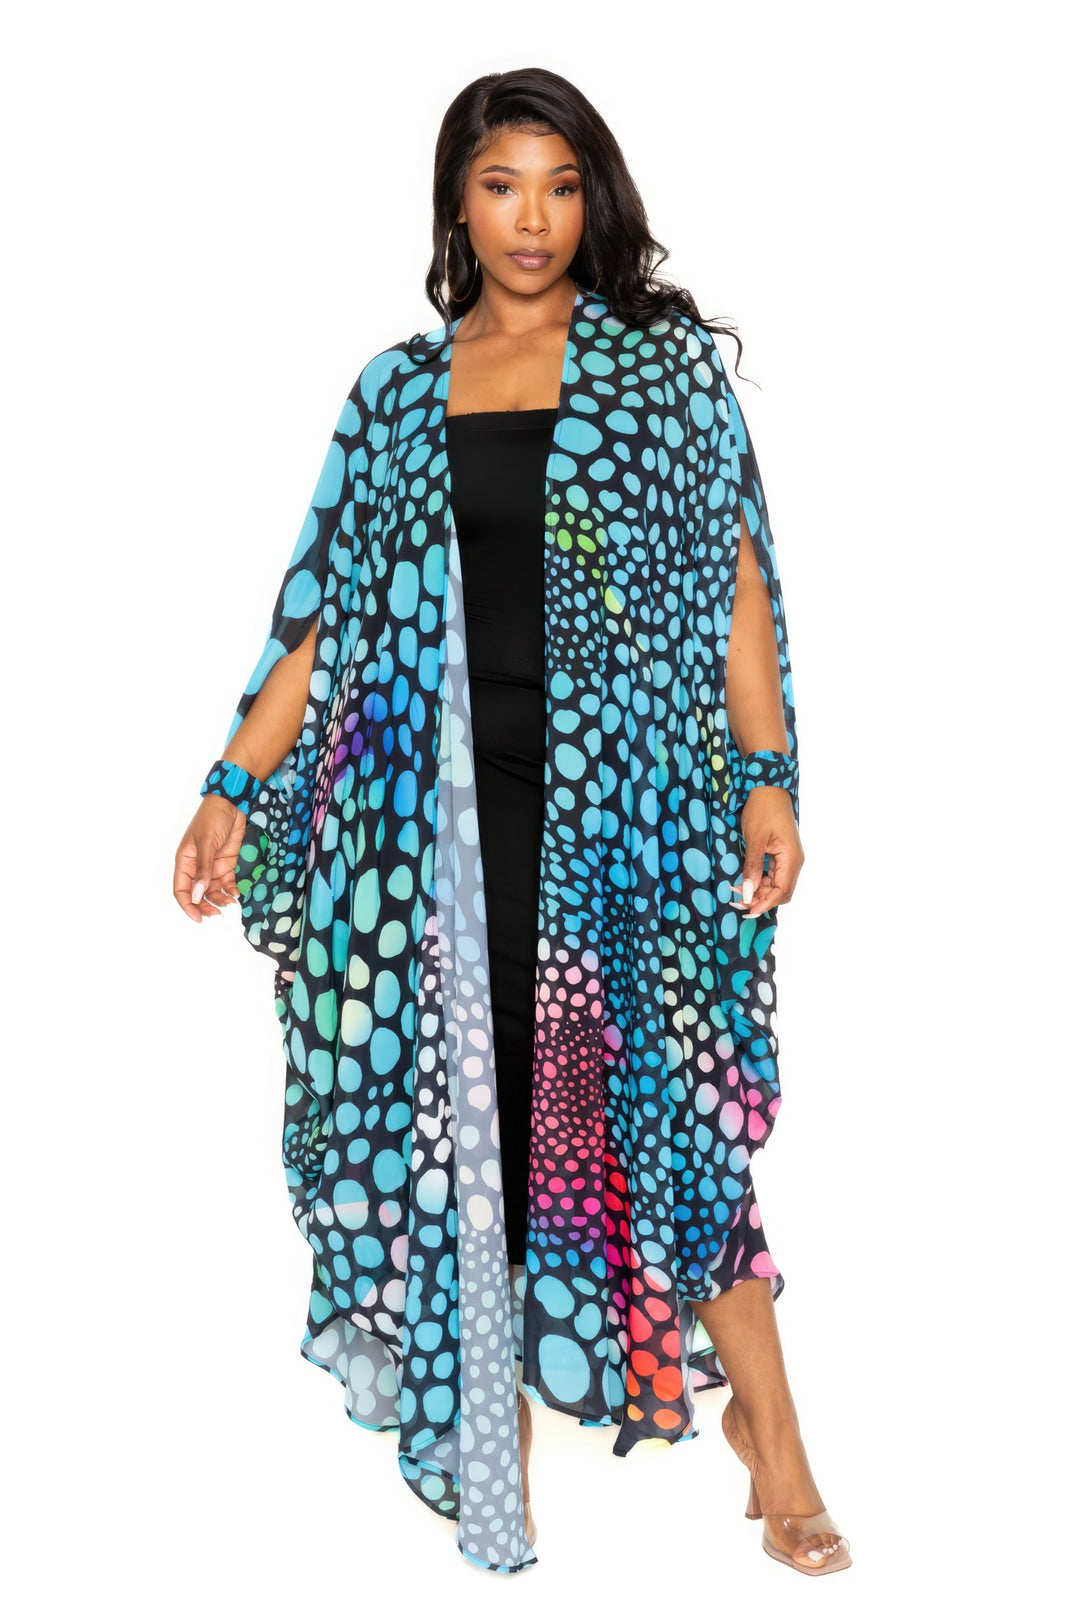 Dot Robe With Wrist Band in blue/black/purple